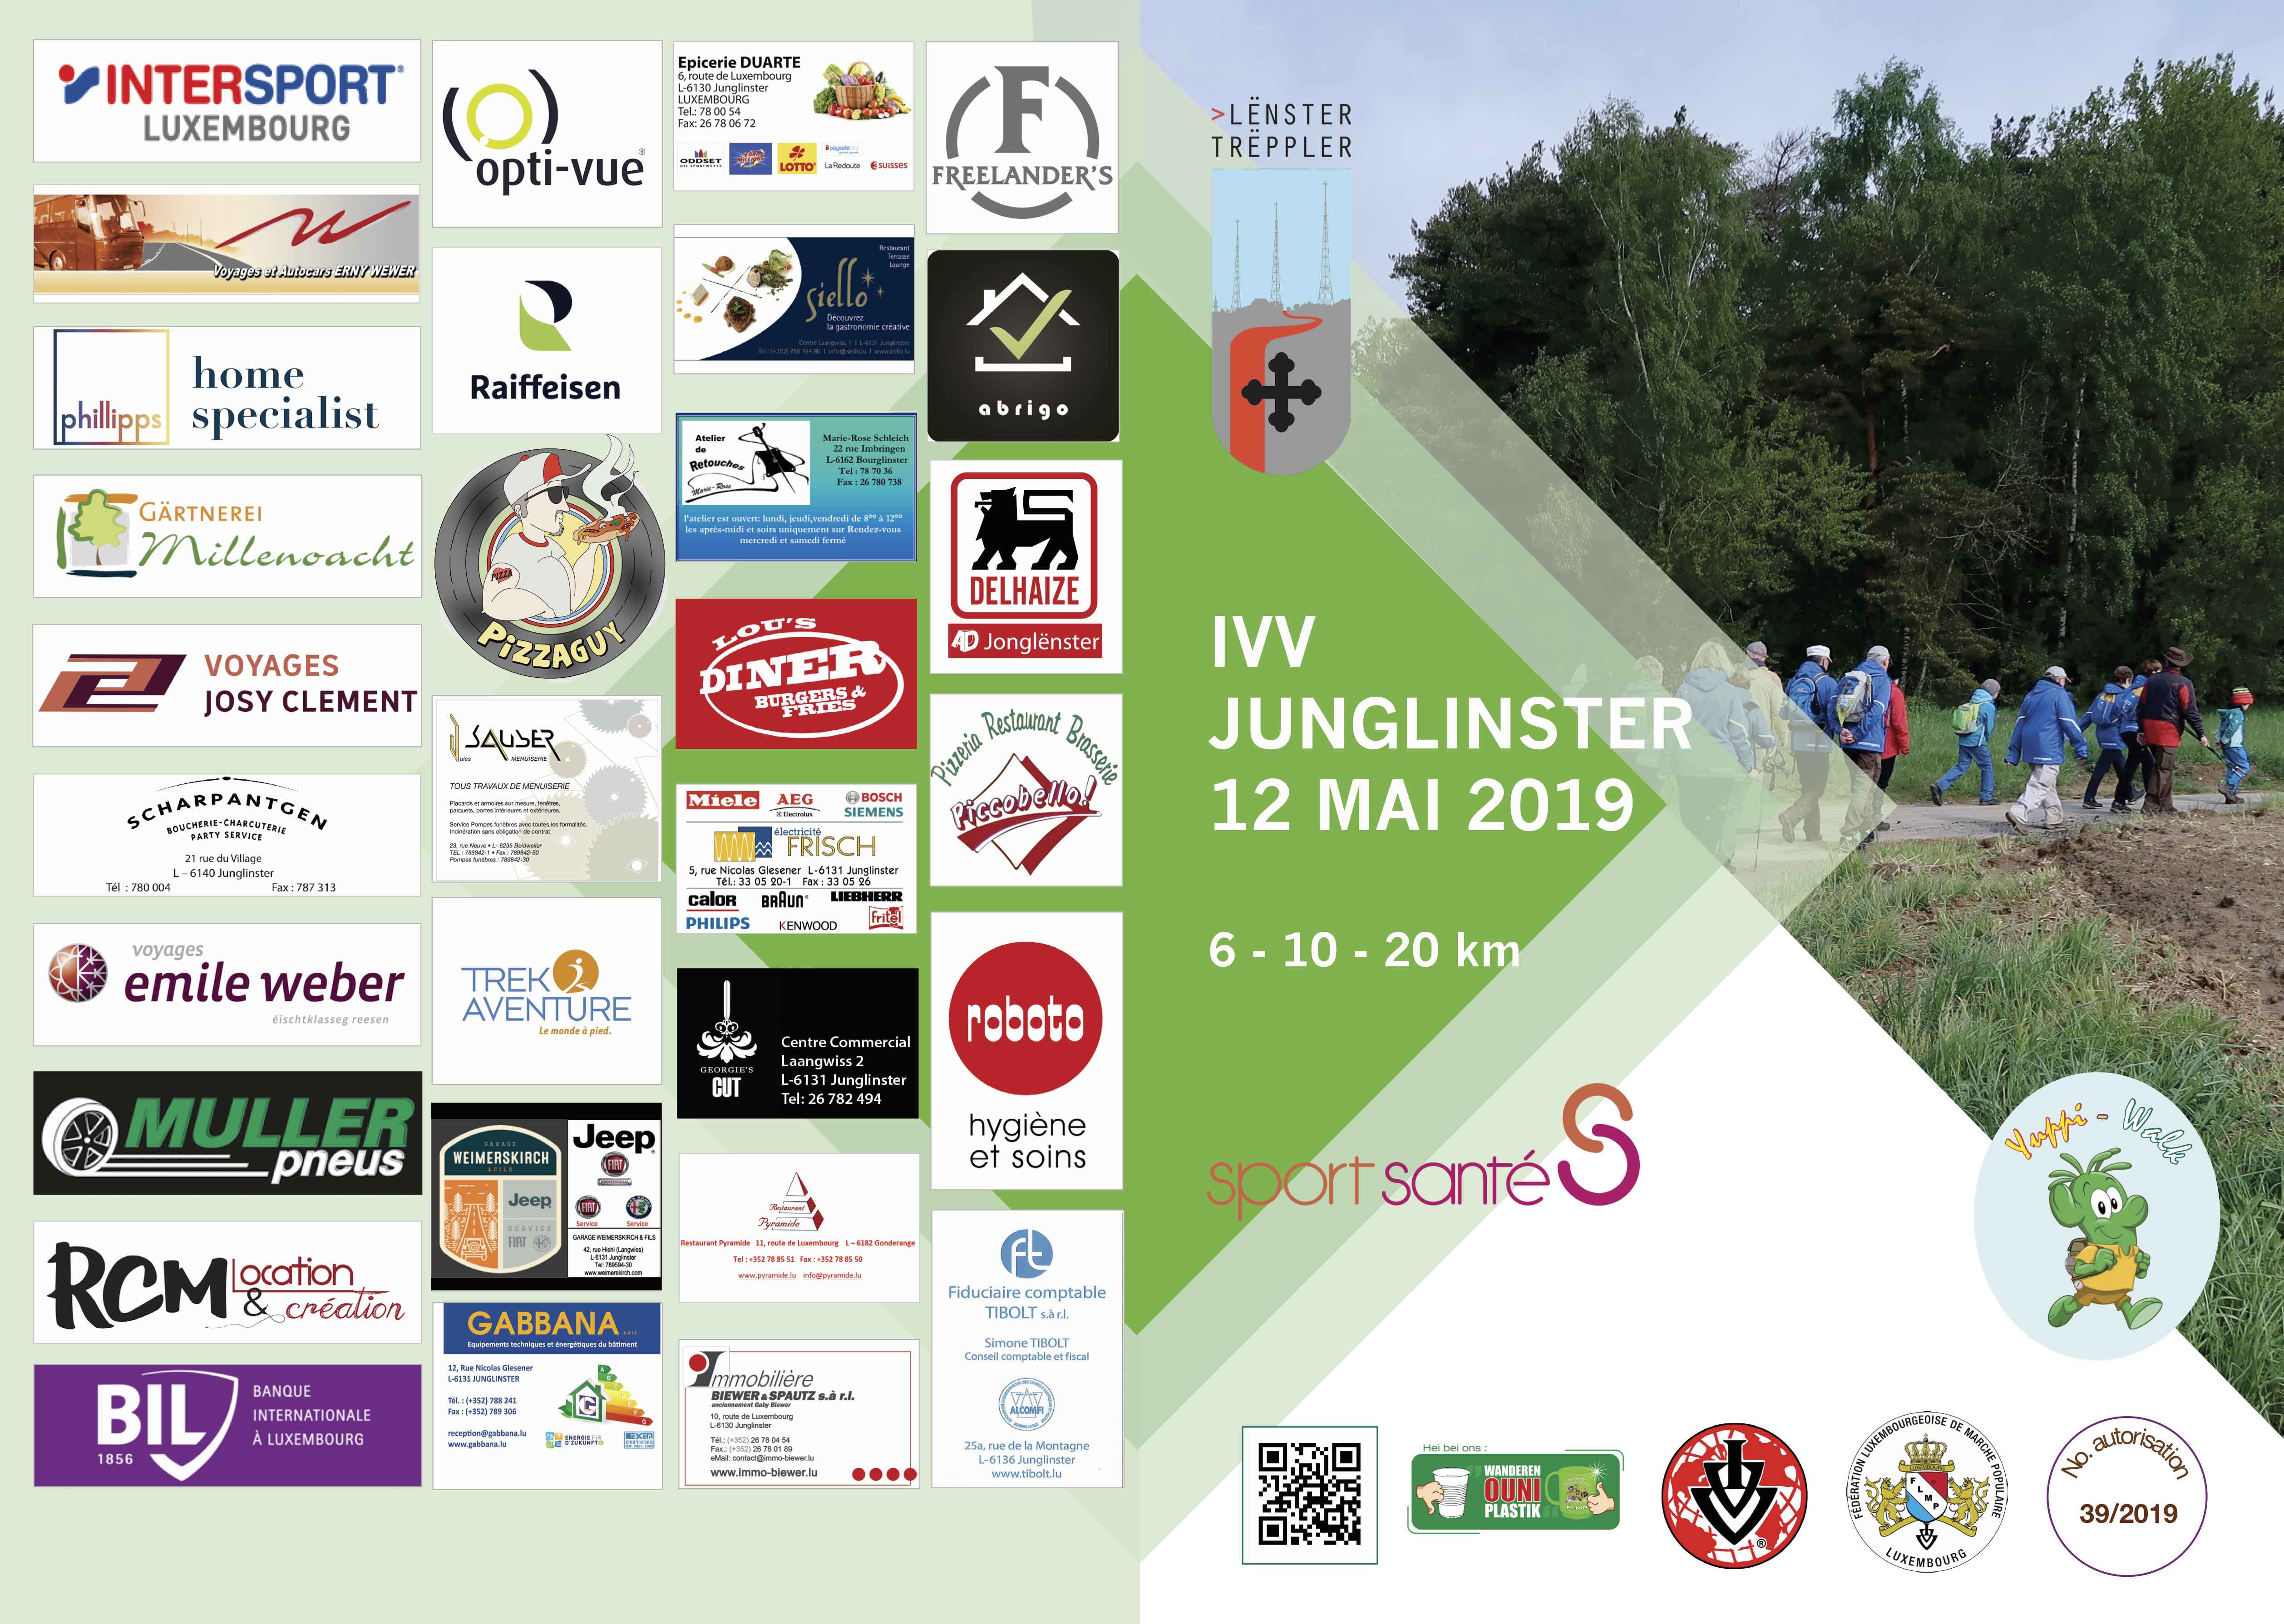 Invitation marche Flyer A4 IVV 2019_1